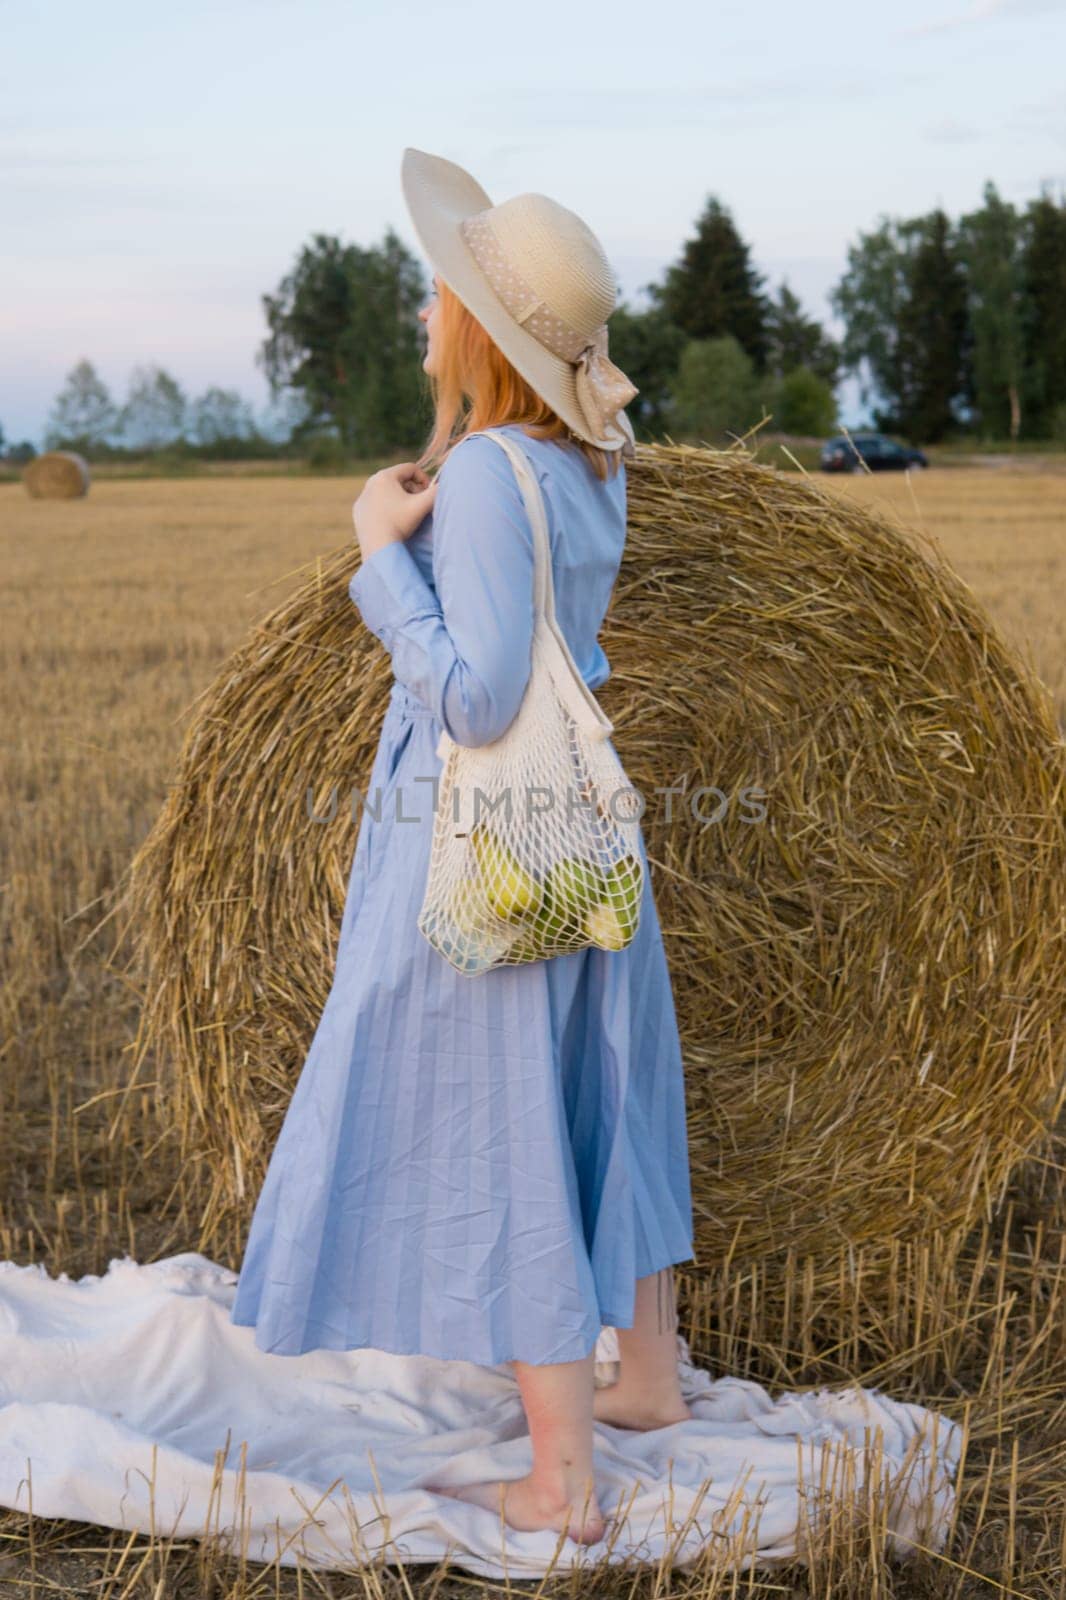 A red-haired woman in a hat and a blue dress walks in a field with haystacks. by Annu1tochka